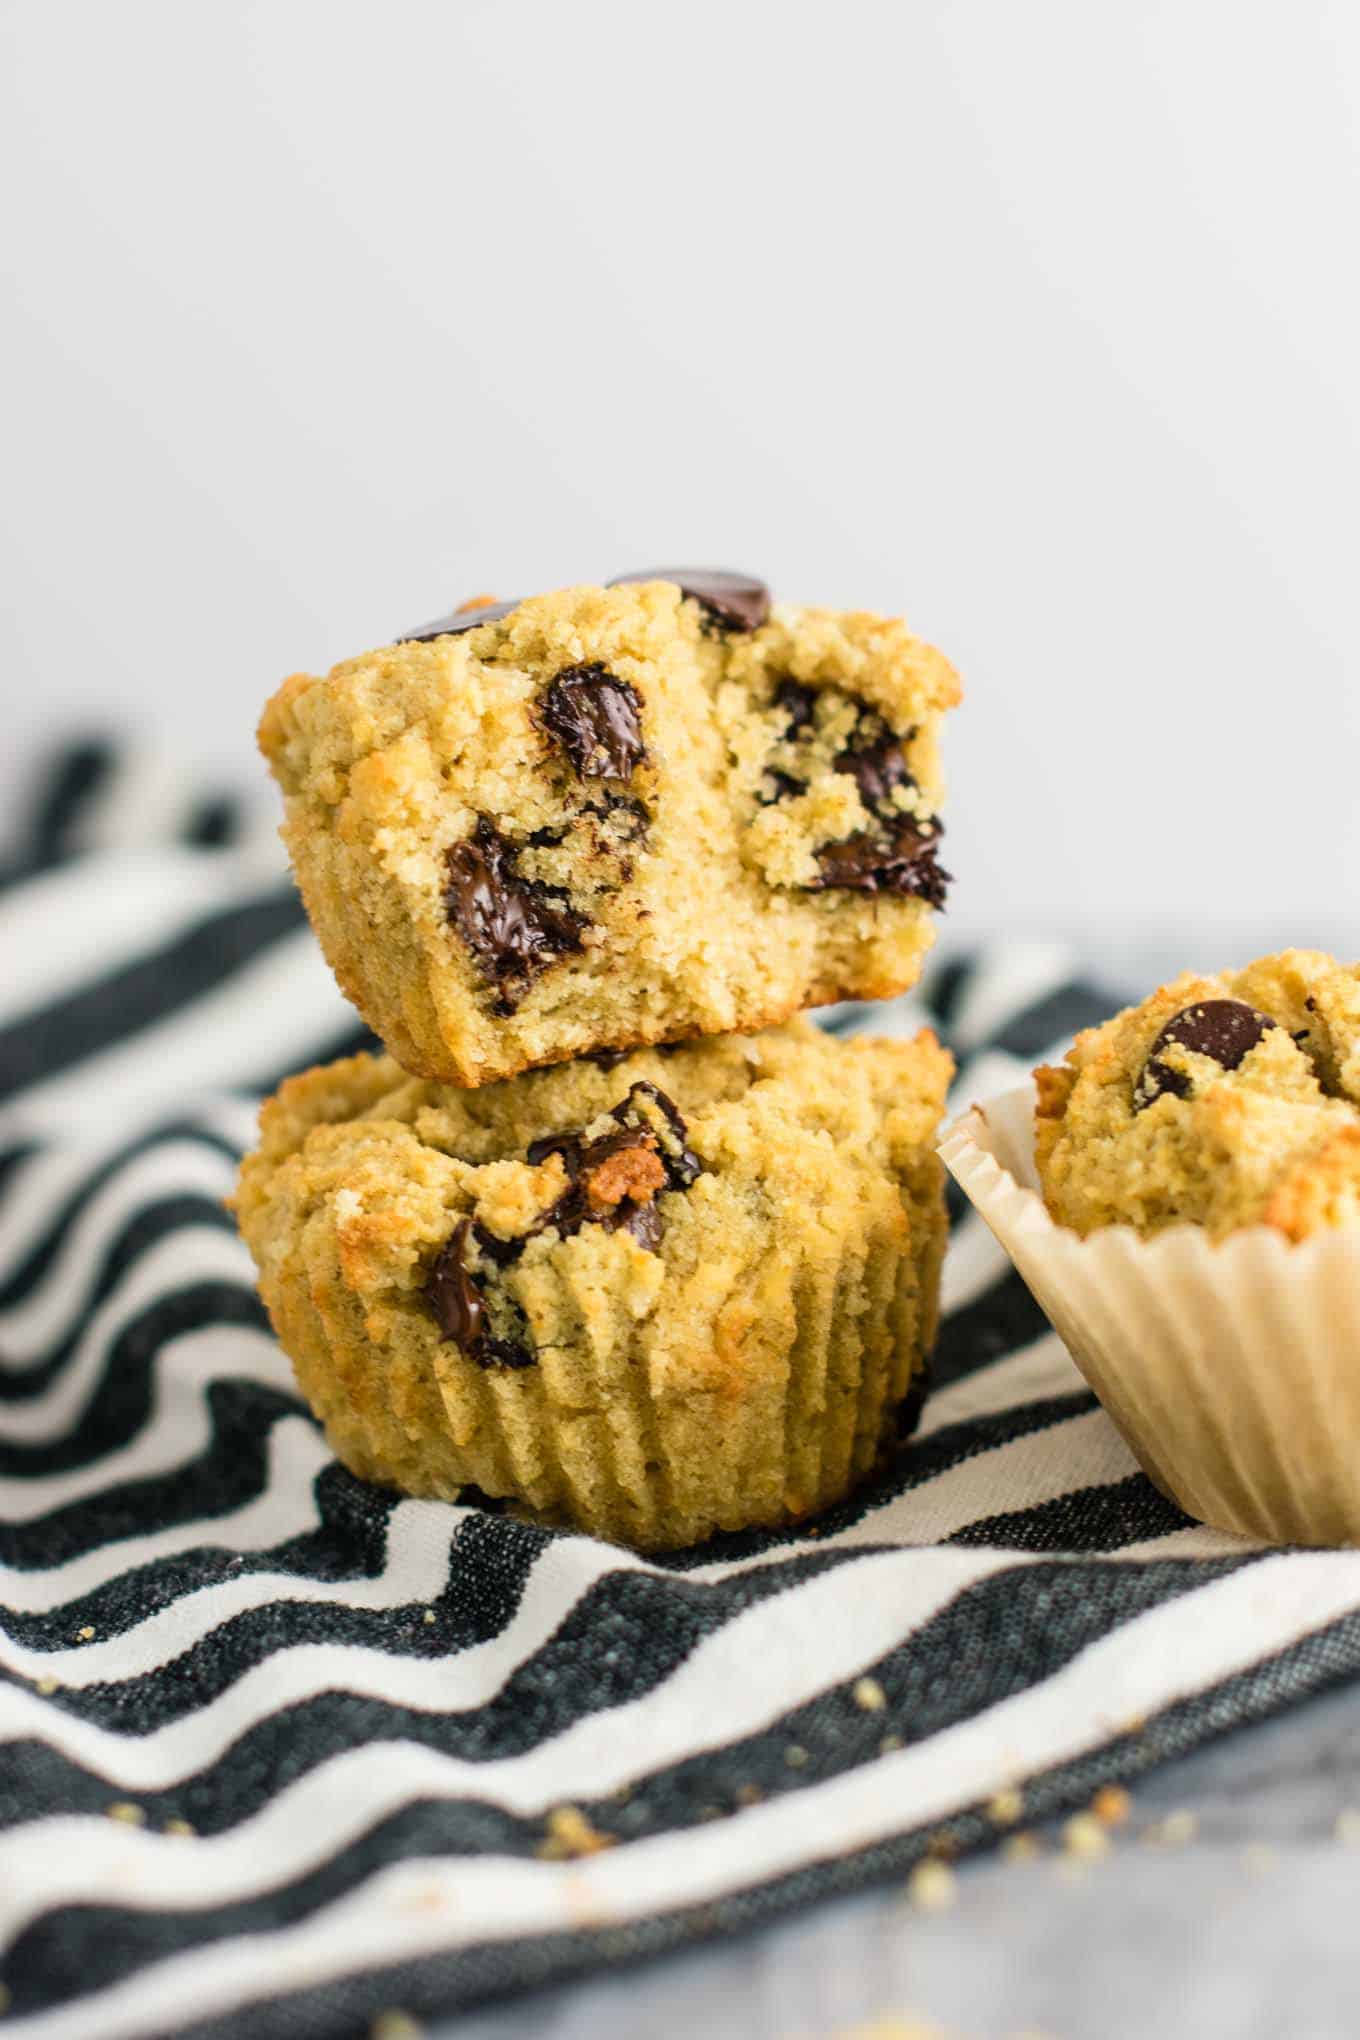 Gluten free chocolate chip muffins (dairy free) Made with coconut flour and oat flour and naturally sweetened! #breakfast #glutenfree #chocolatechipmuffins #glutenfreedairyfree #dairyfree